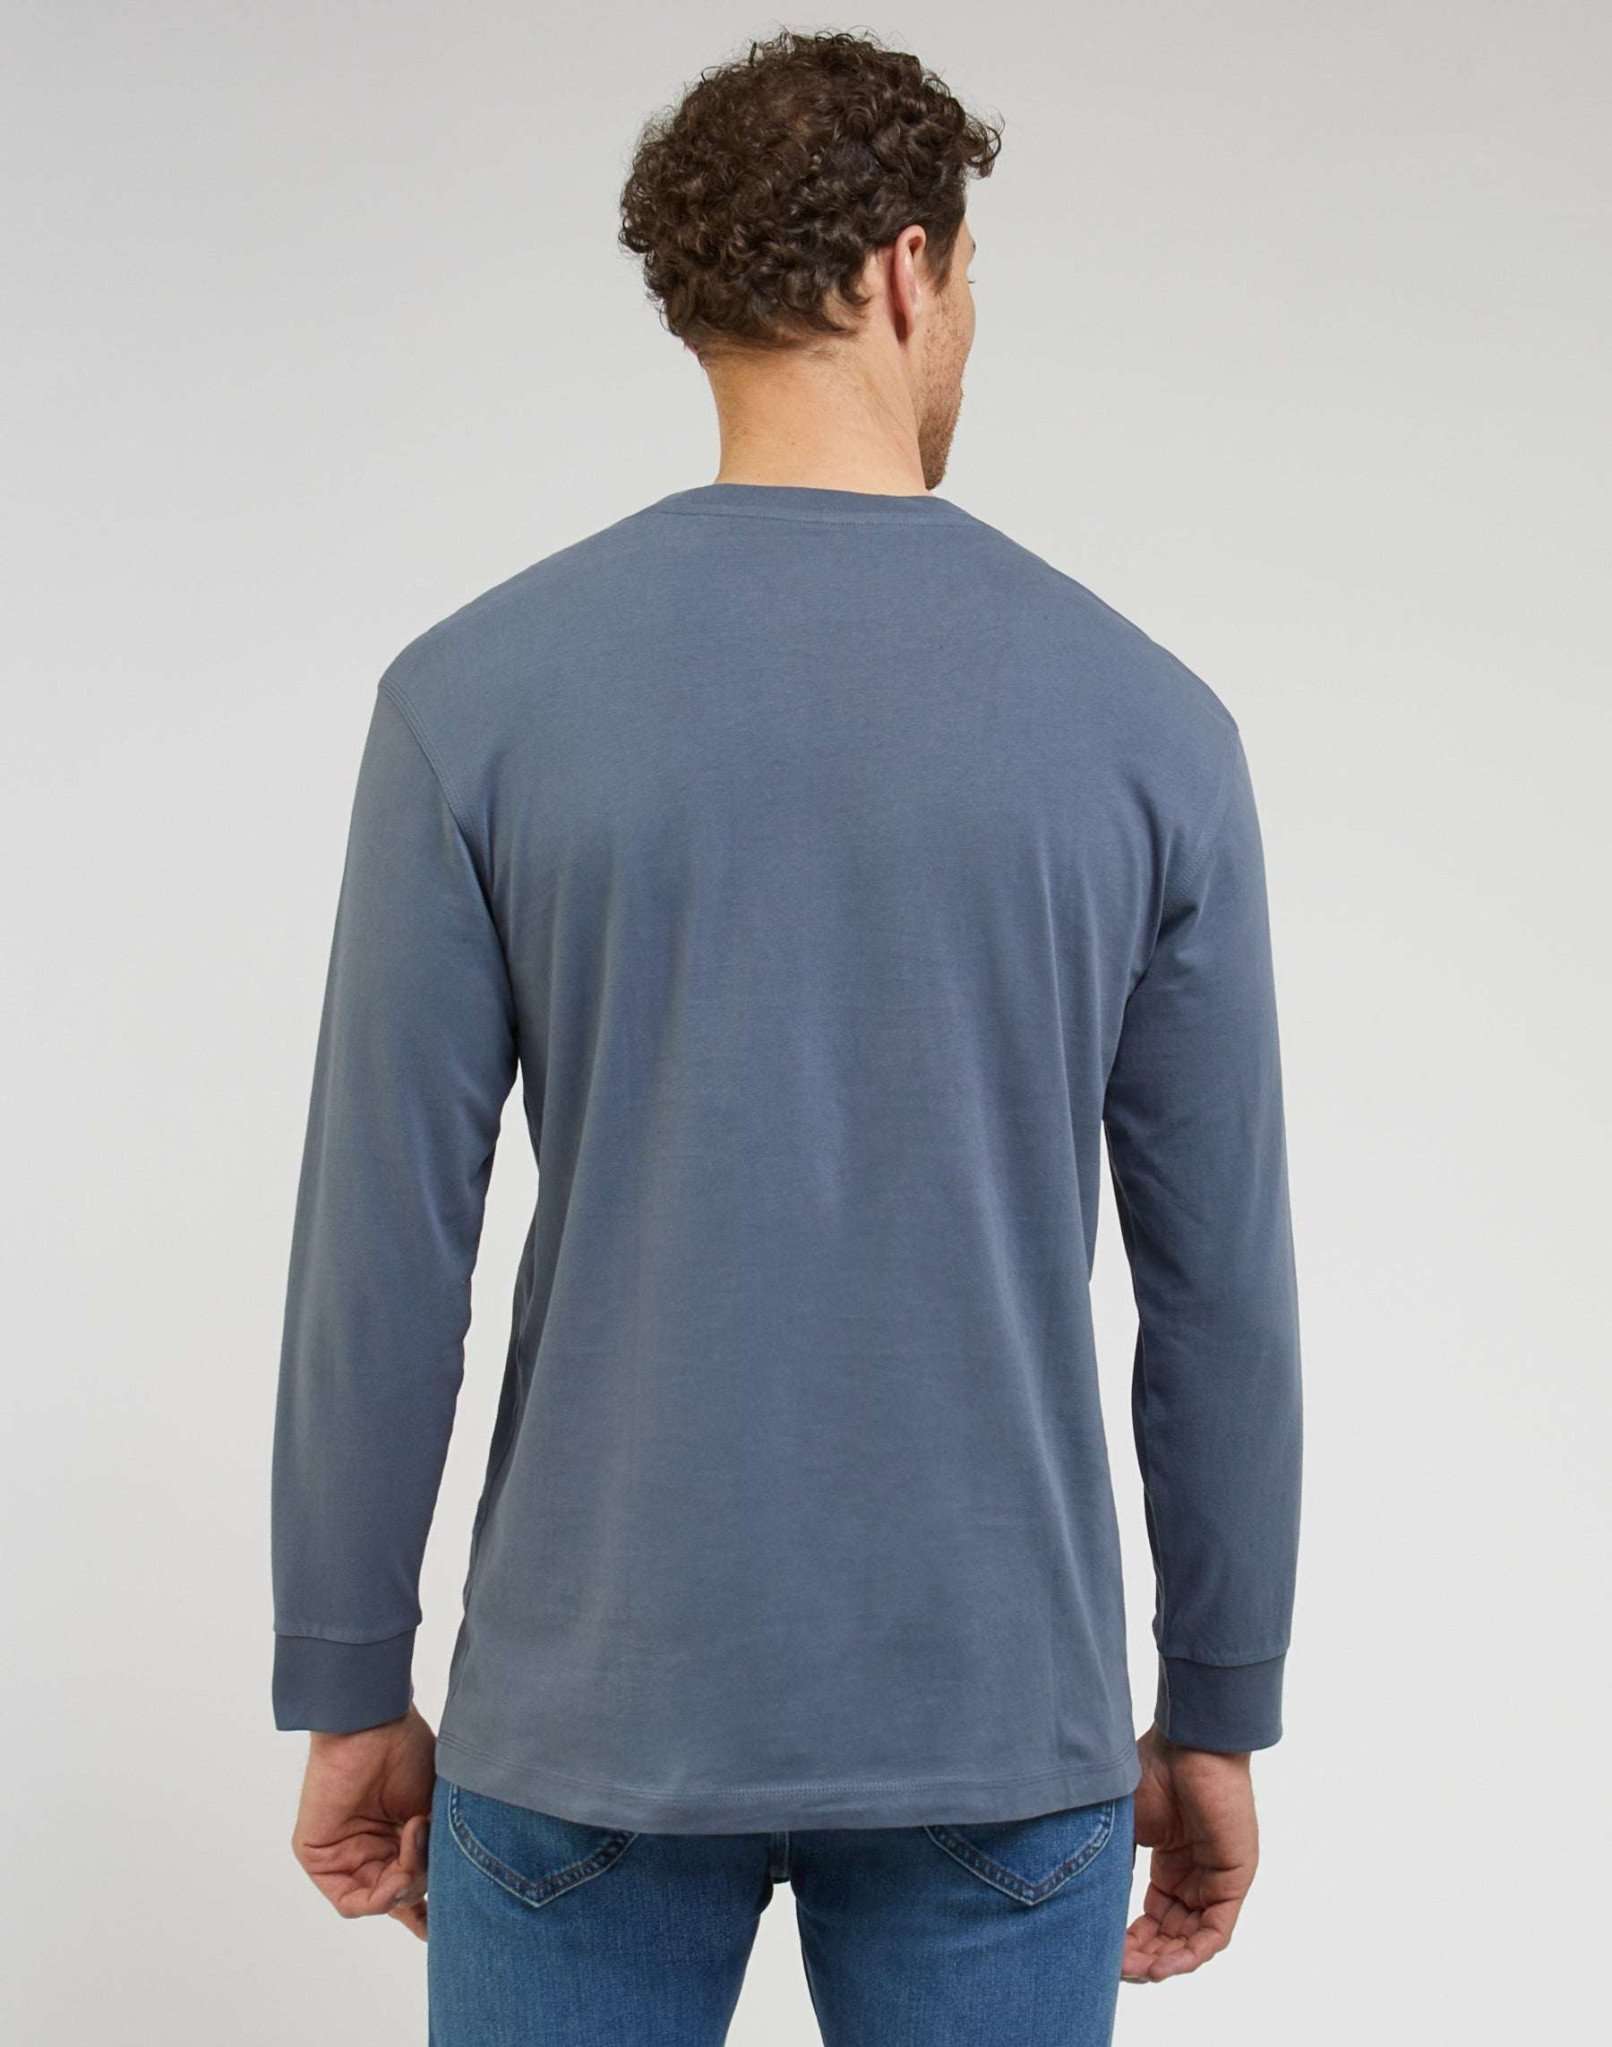 LS Ww Pocket Tee in Taint Grey Pullover Lee   